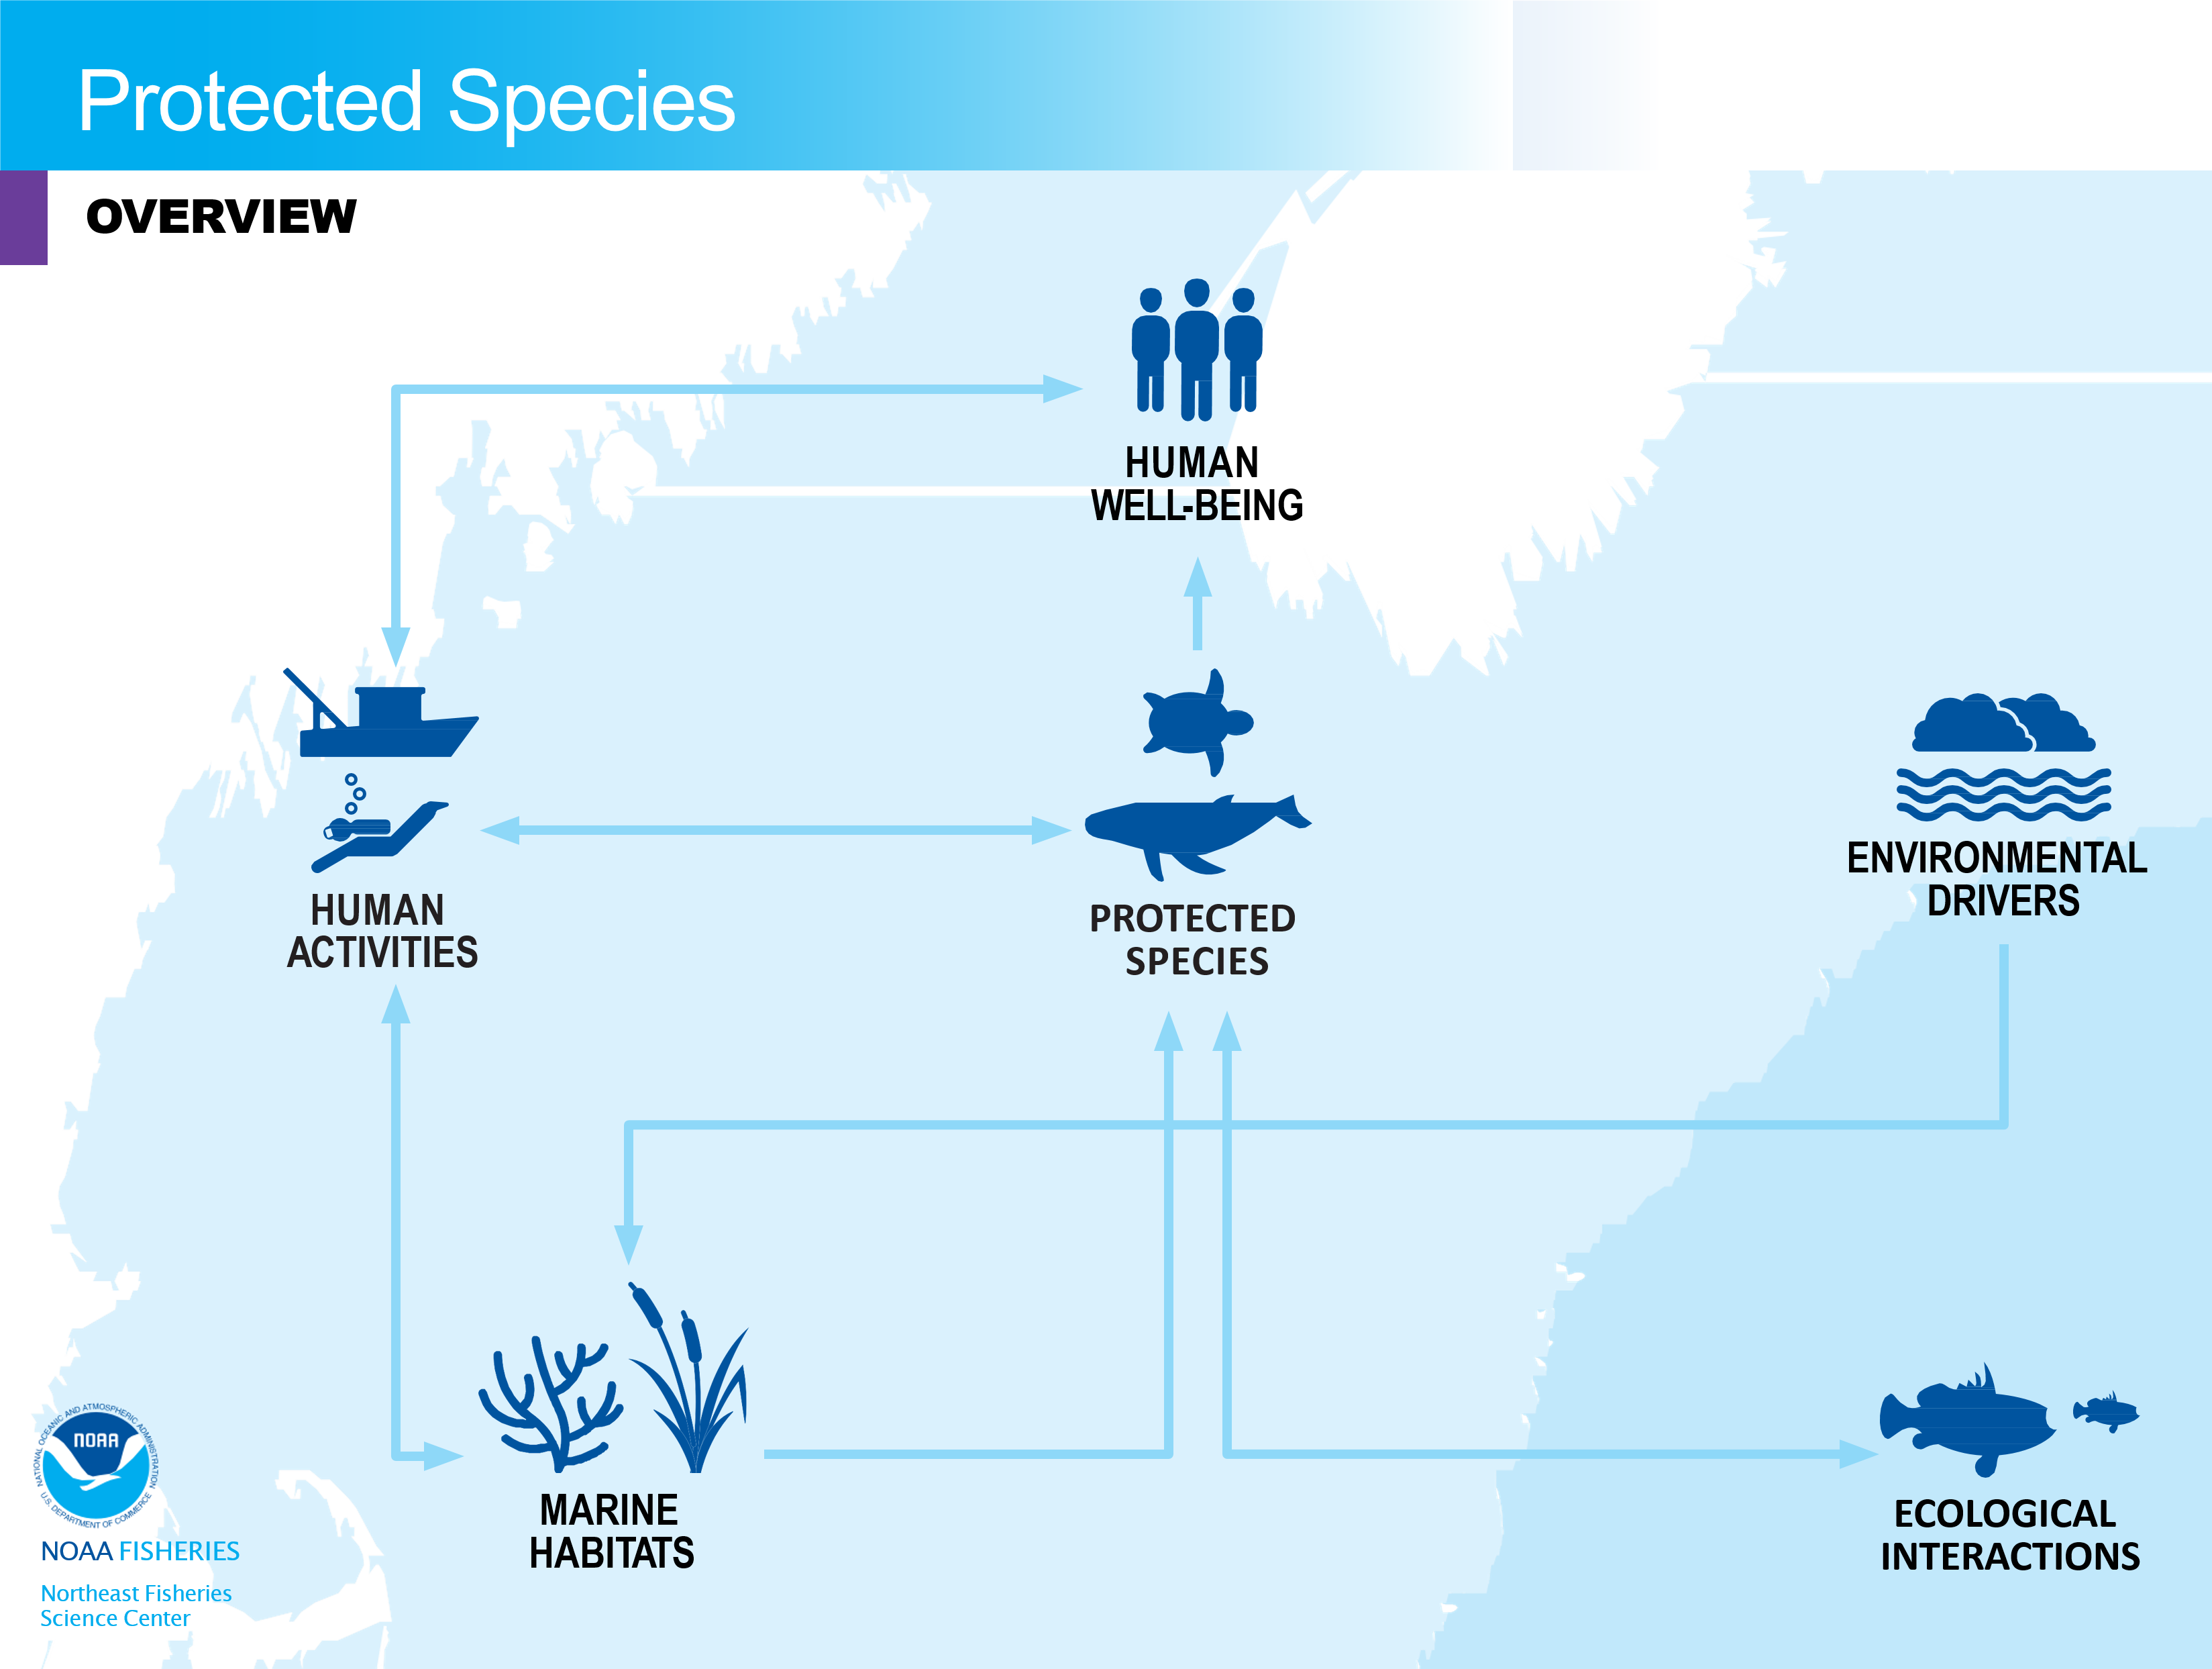 Conceptual model overview of protected species in the NE-LME